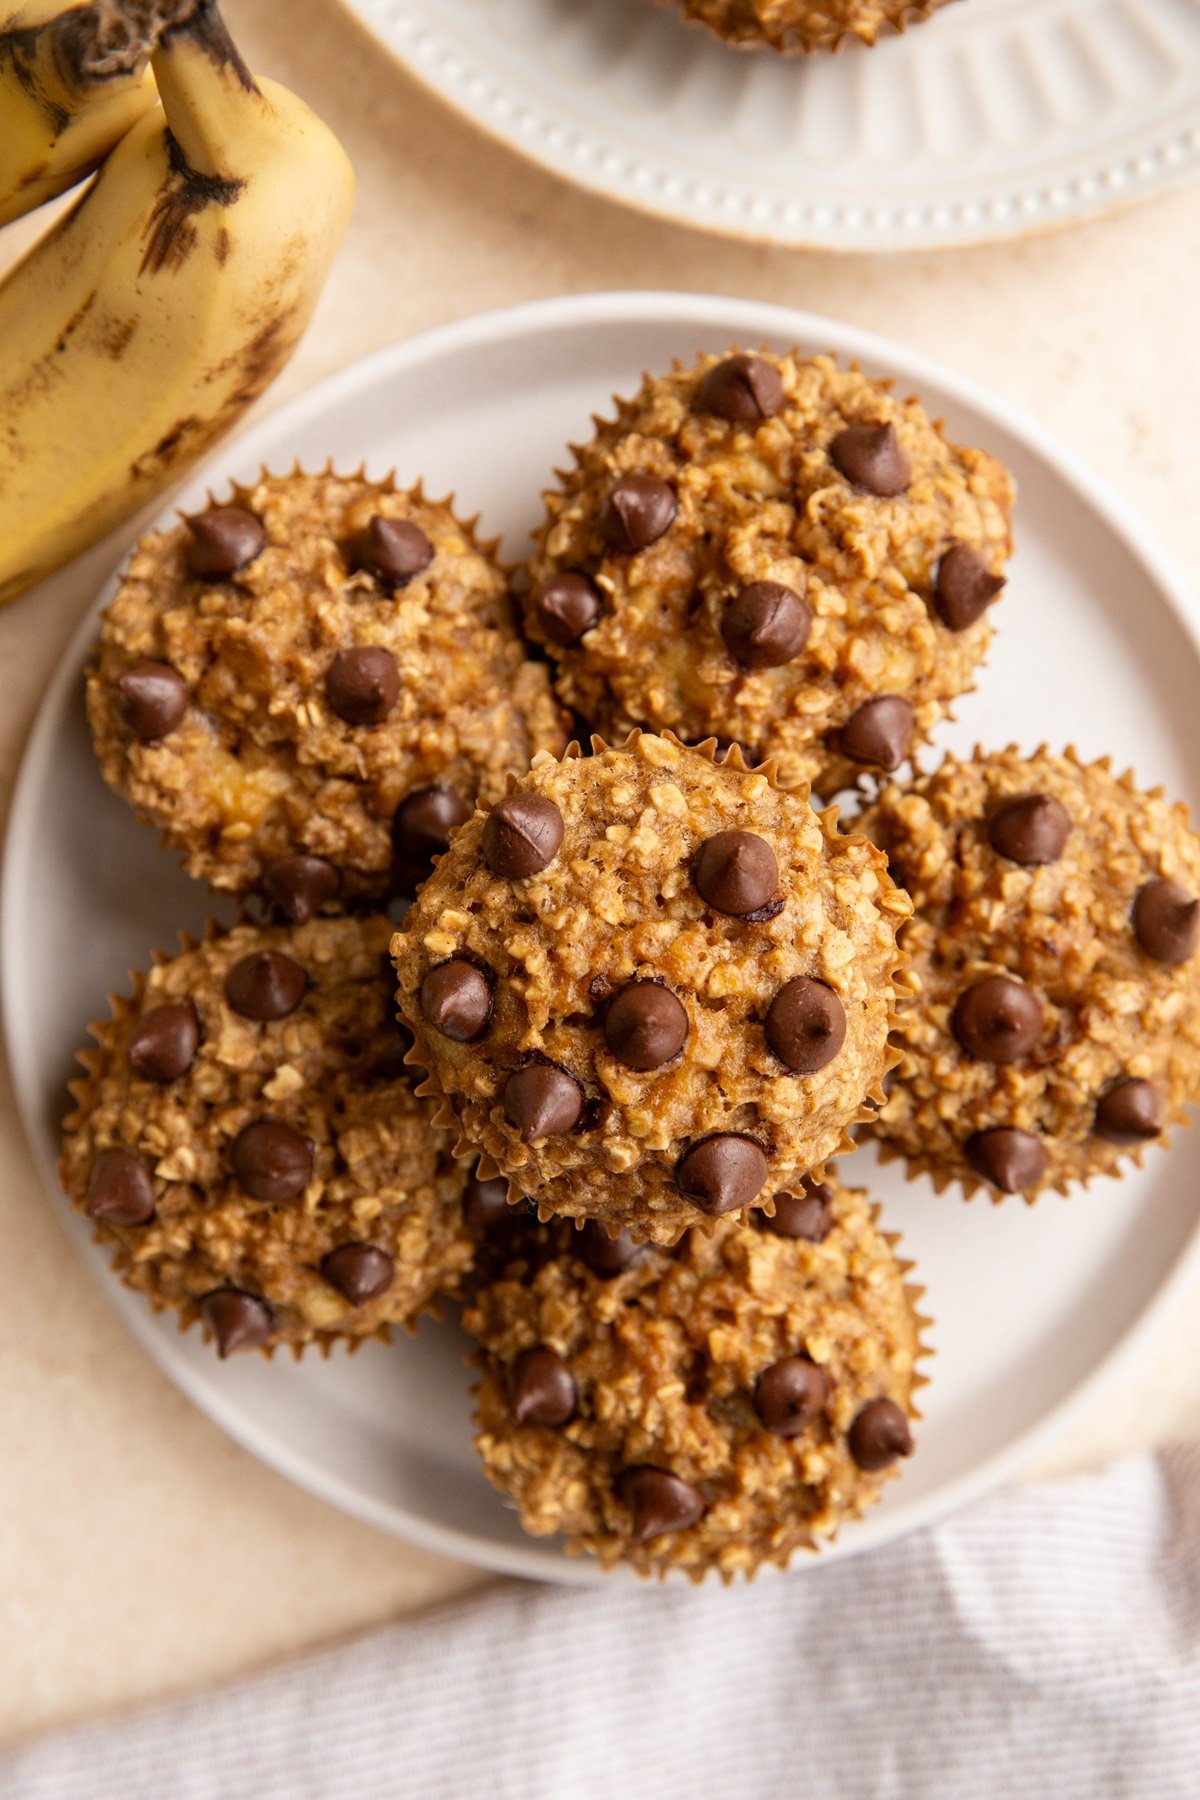 Plate of banana oatmeal muffins with ripe bananas and a napkin to the side.